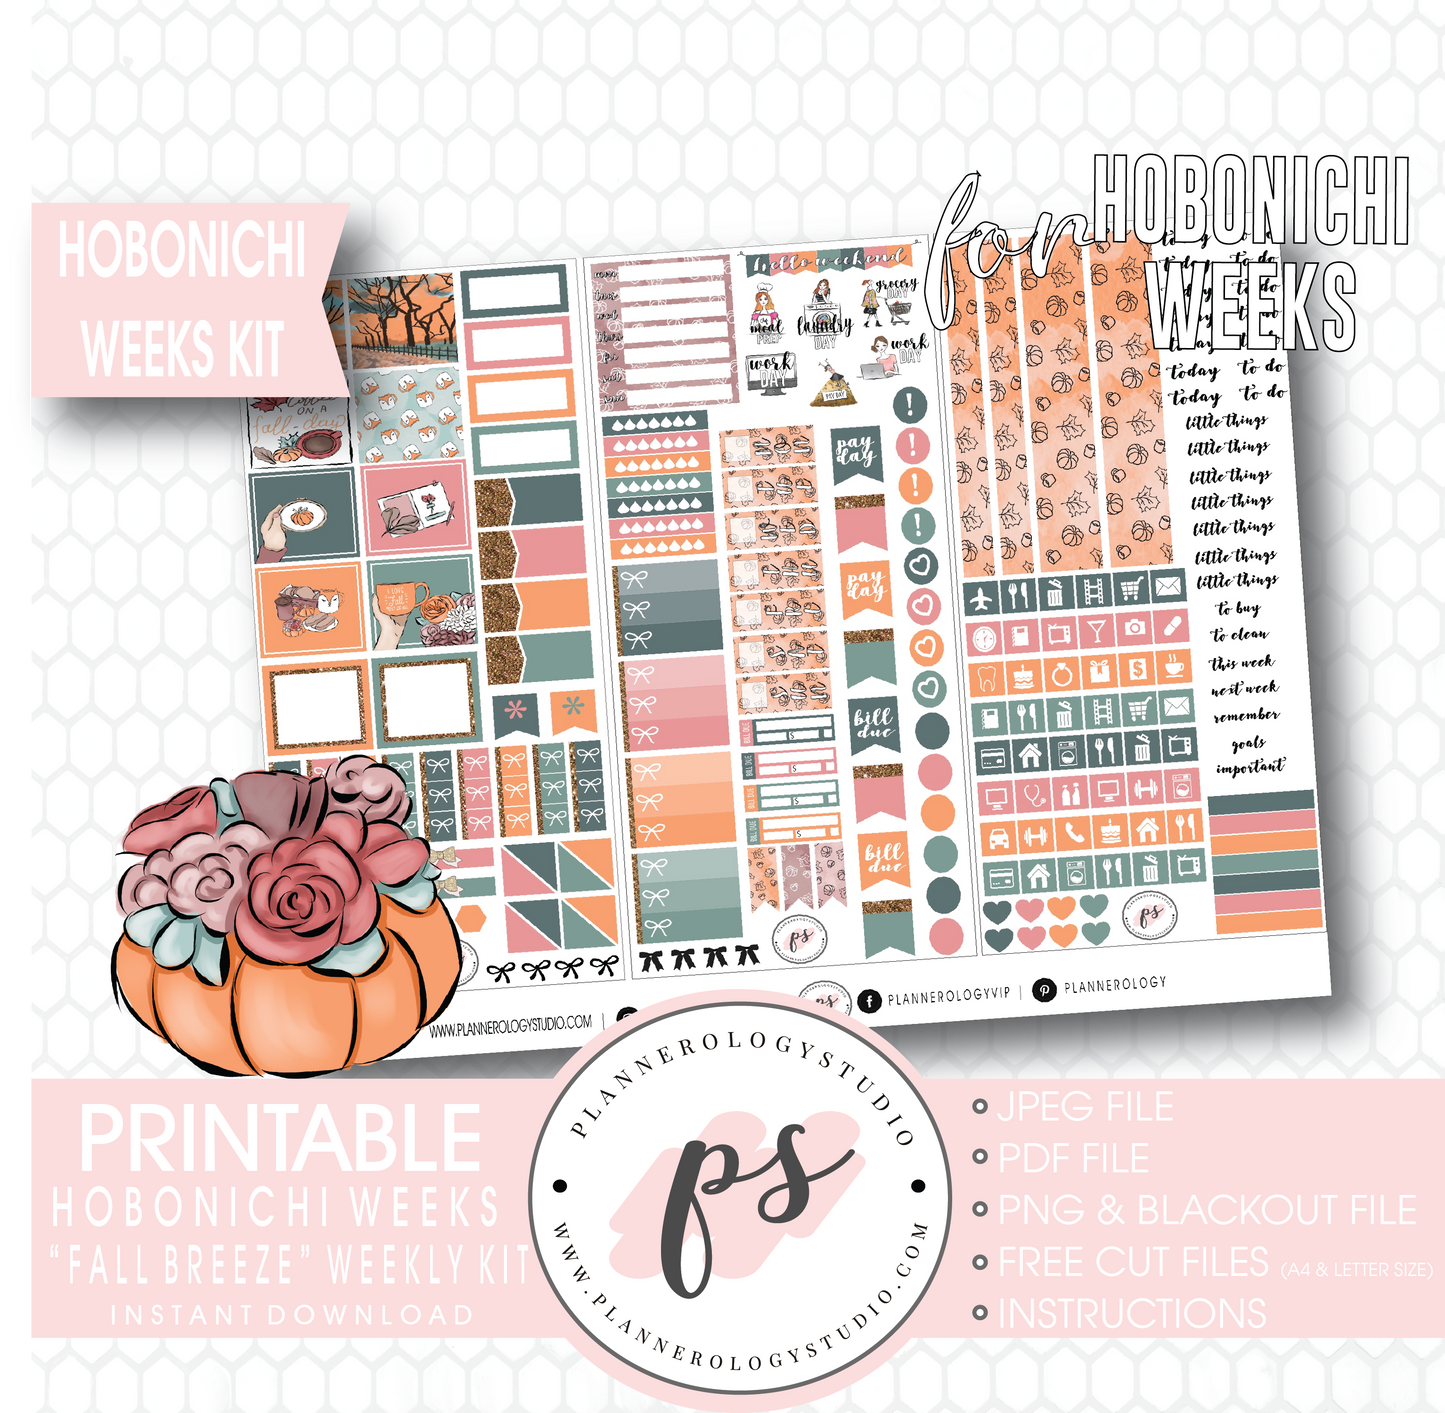 Fall Breeze Weekly Kit Printable Digital Planner Stickers (for use with Hobonichi Weeks) - Plannerologystudio